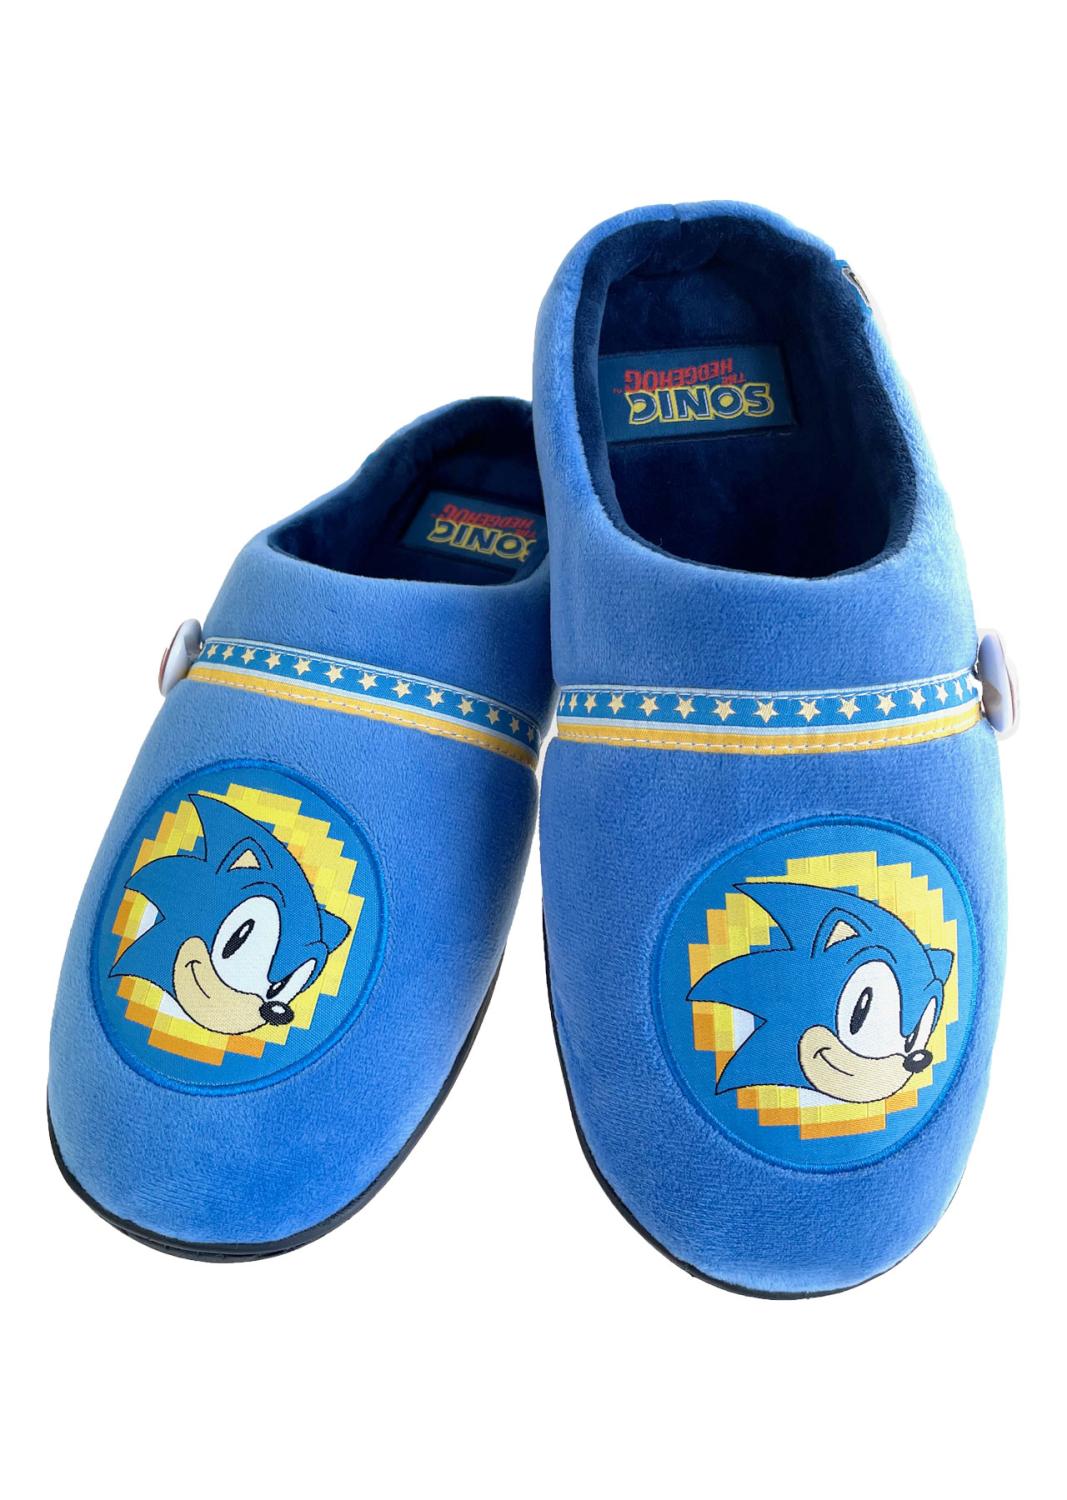 Sonic Go Faster Mule Slippers Blue Adult Large UK 8-10 rubber sole